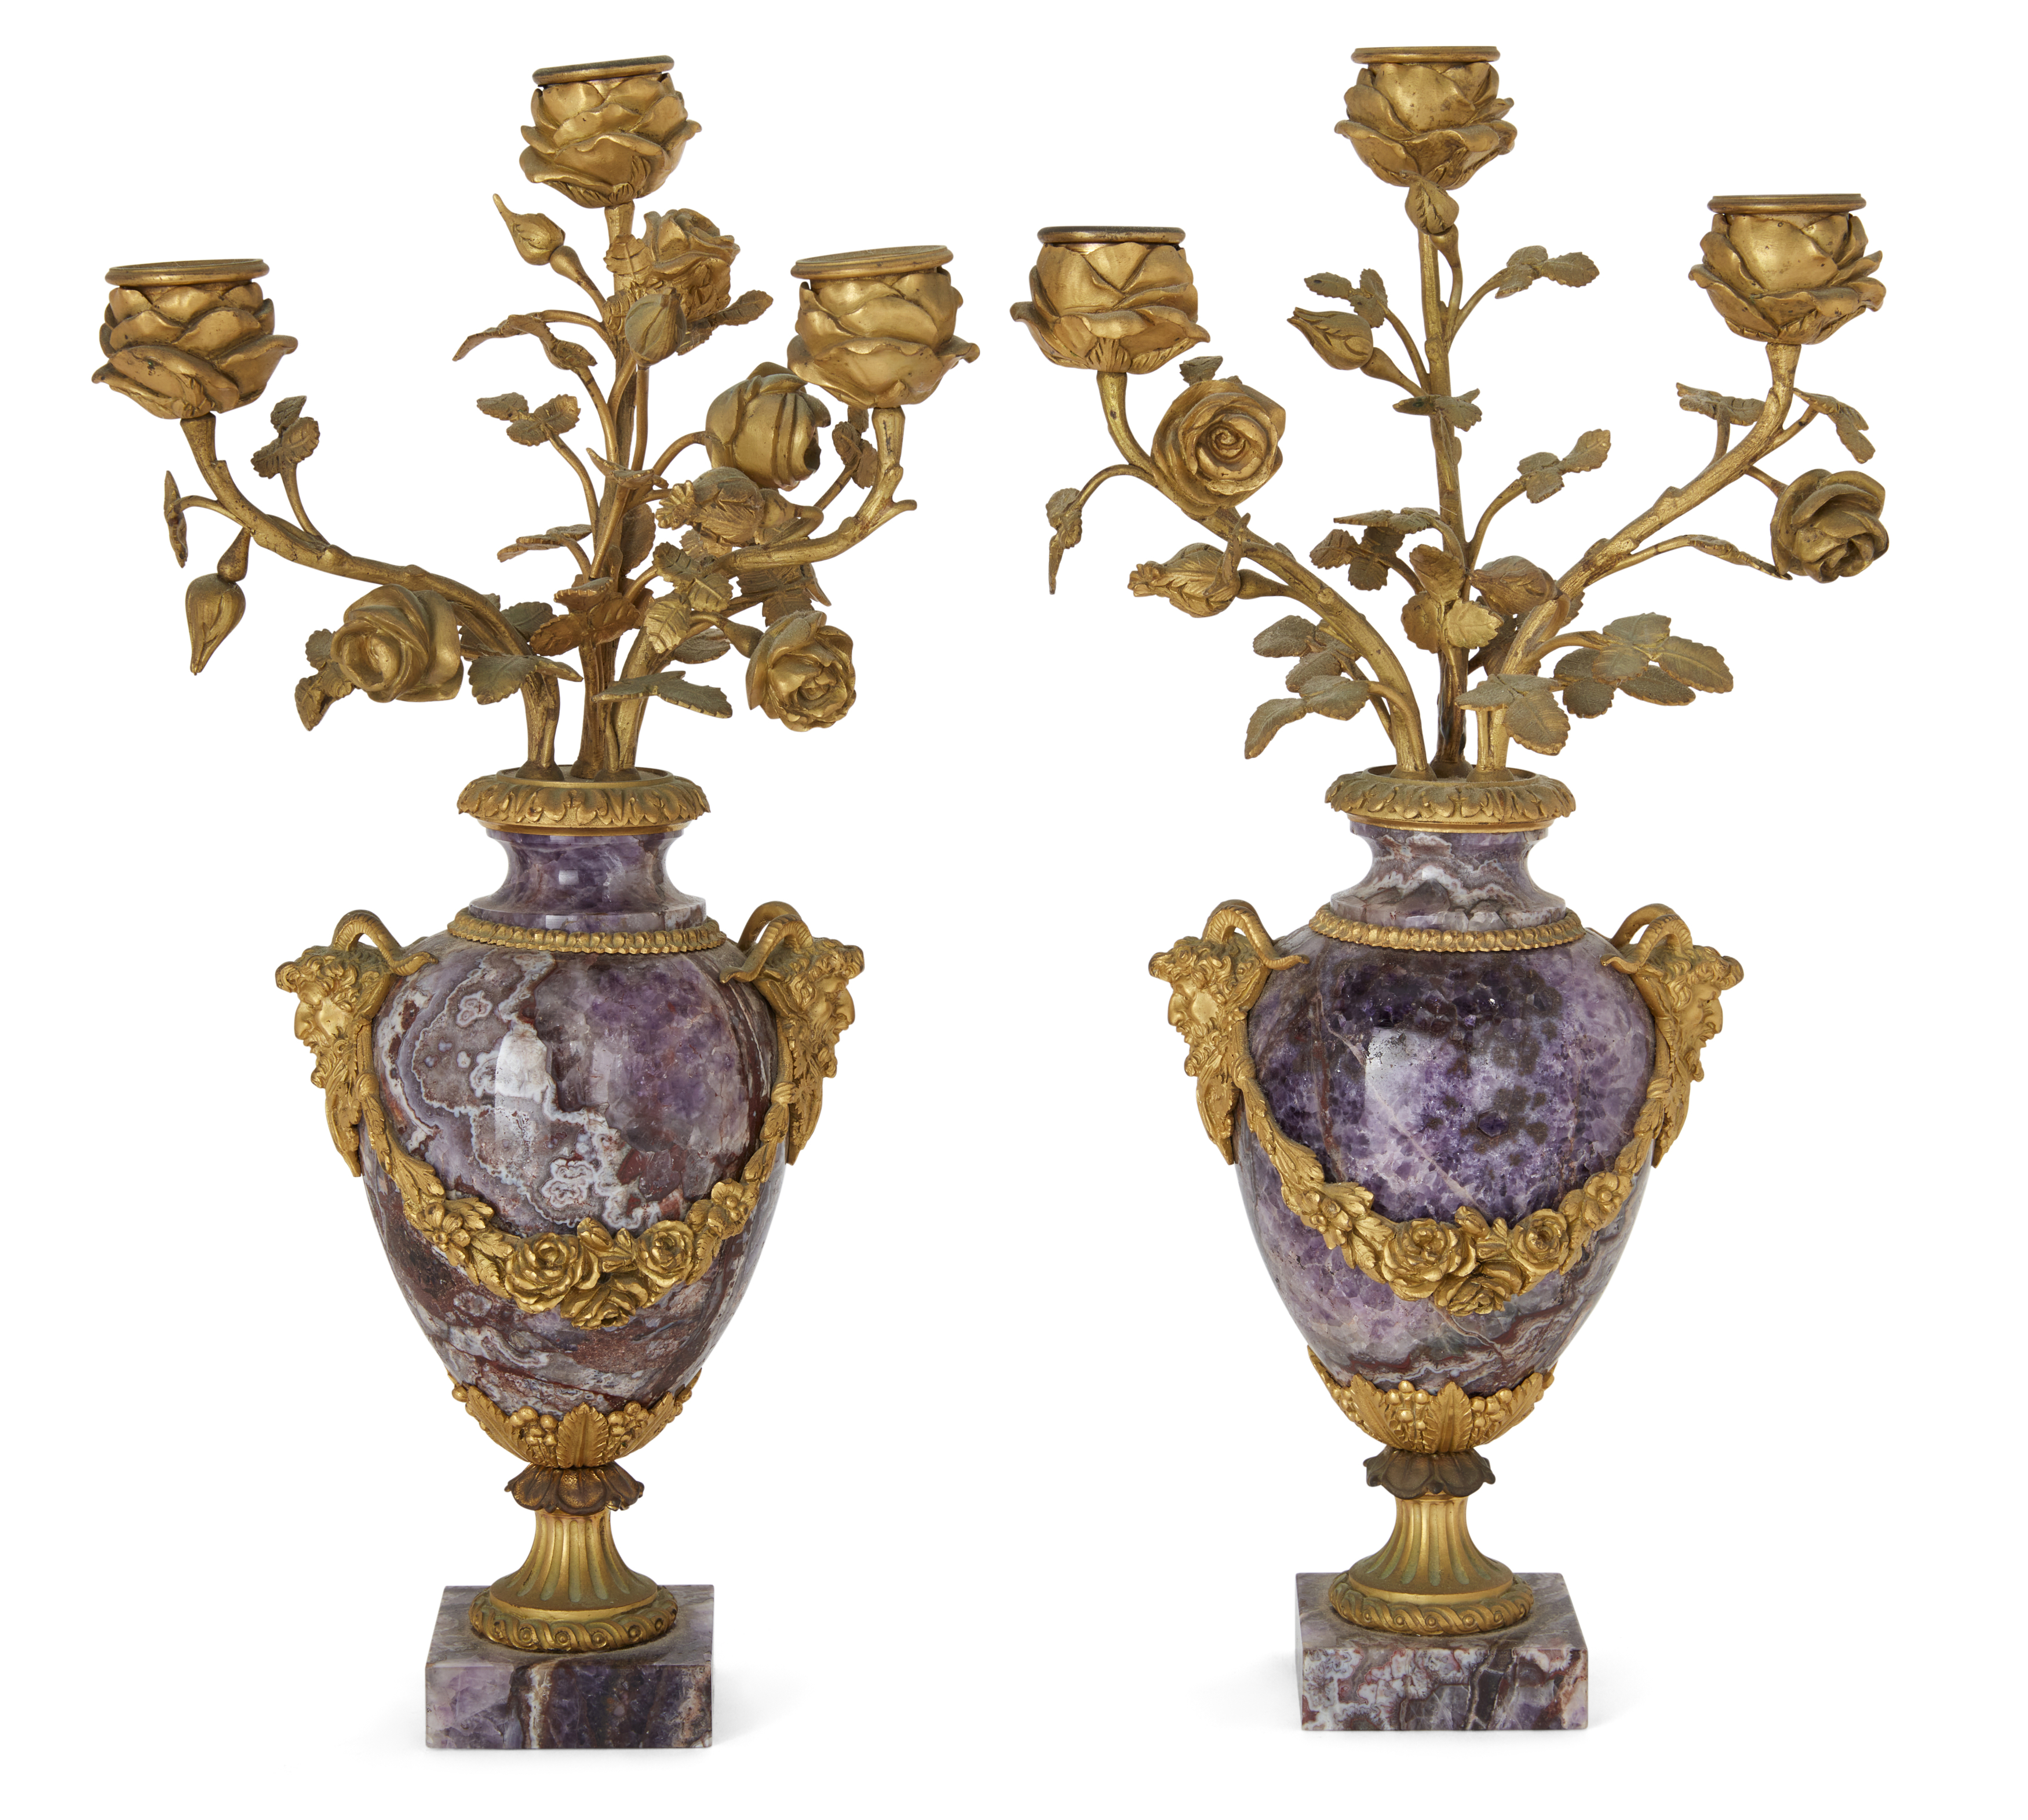 A pair of French gilt-bronze mounted amethyst three-light candelabra, Of Louis XVI style, mid-19t...